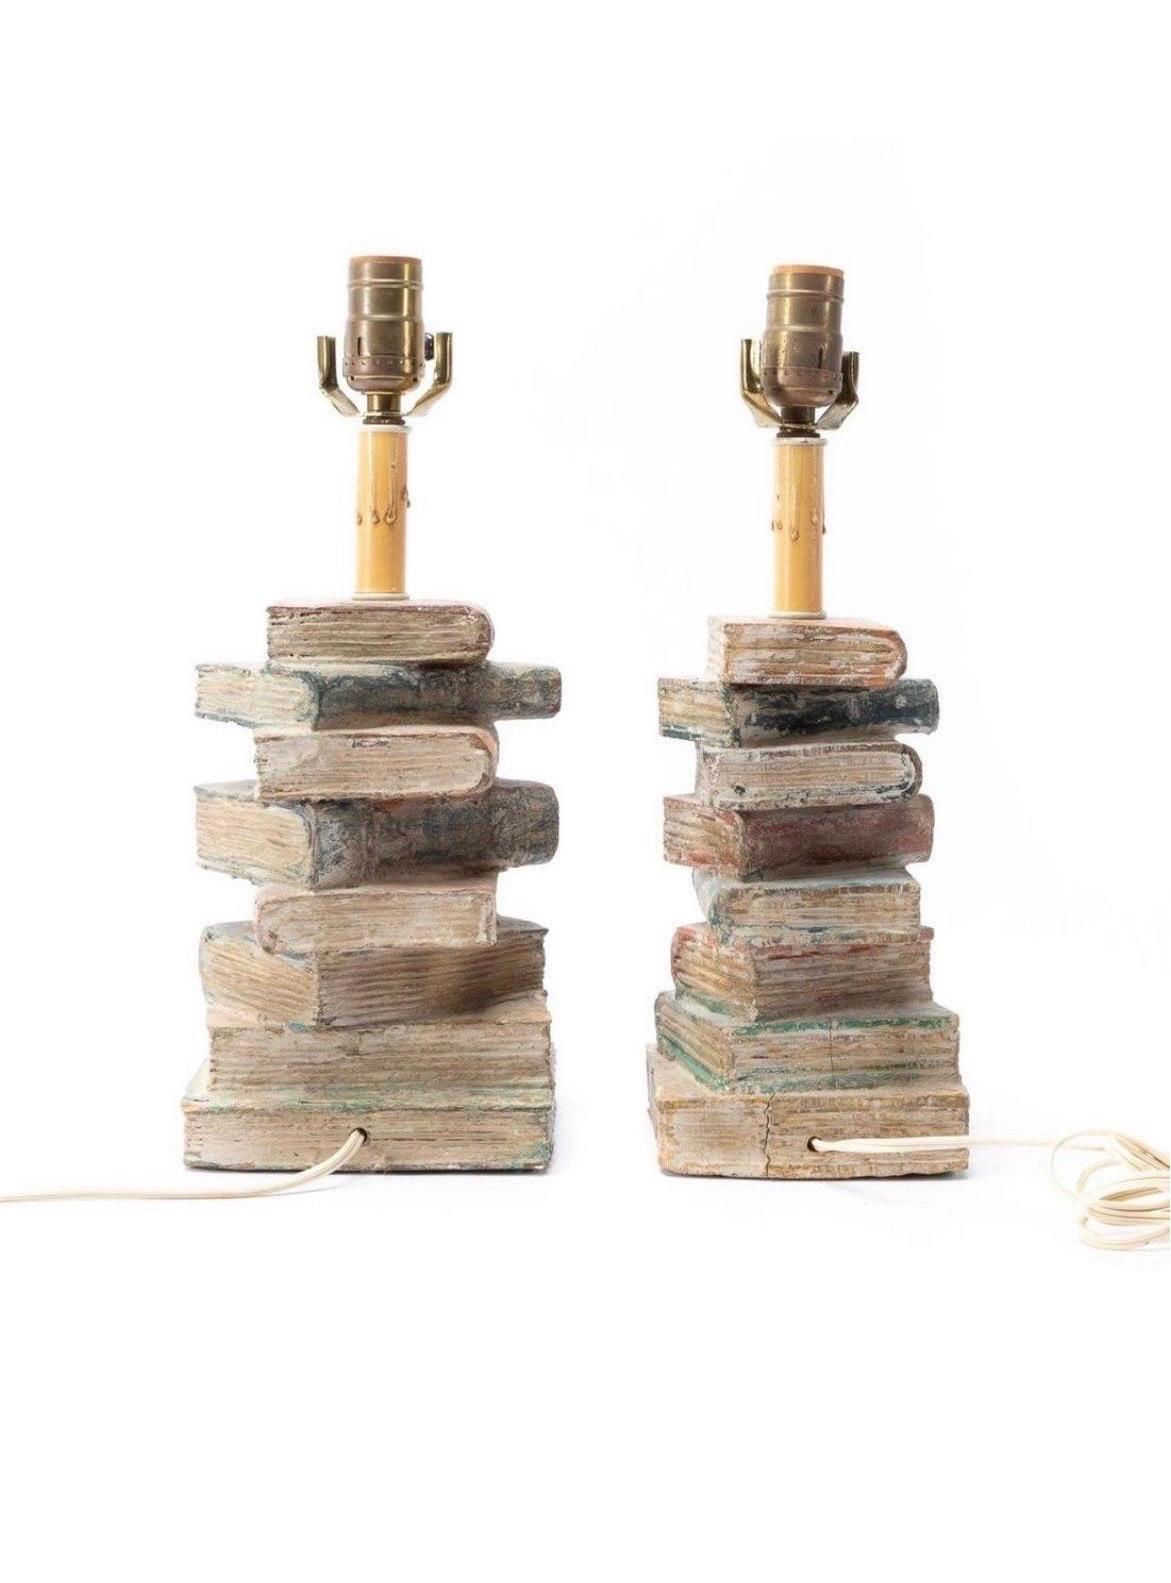 Group of two distressed wooden stacked book lamps, having a polychrome painted finish. Unmarked. Approx. of the wider stack, H 14.5